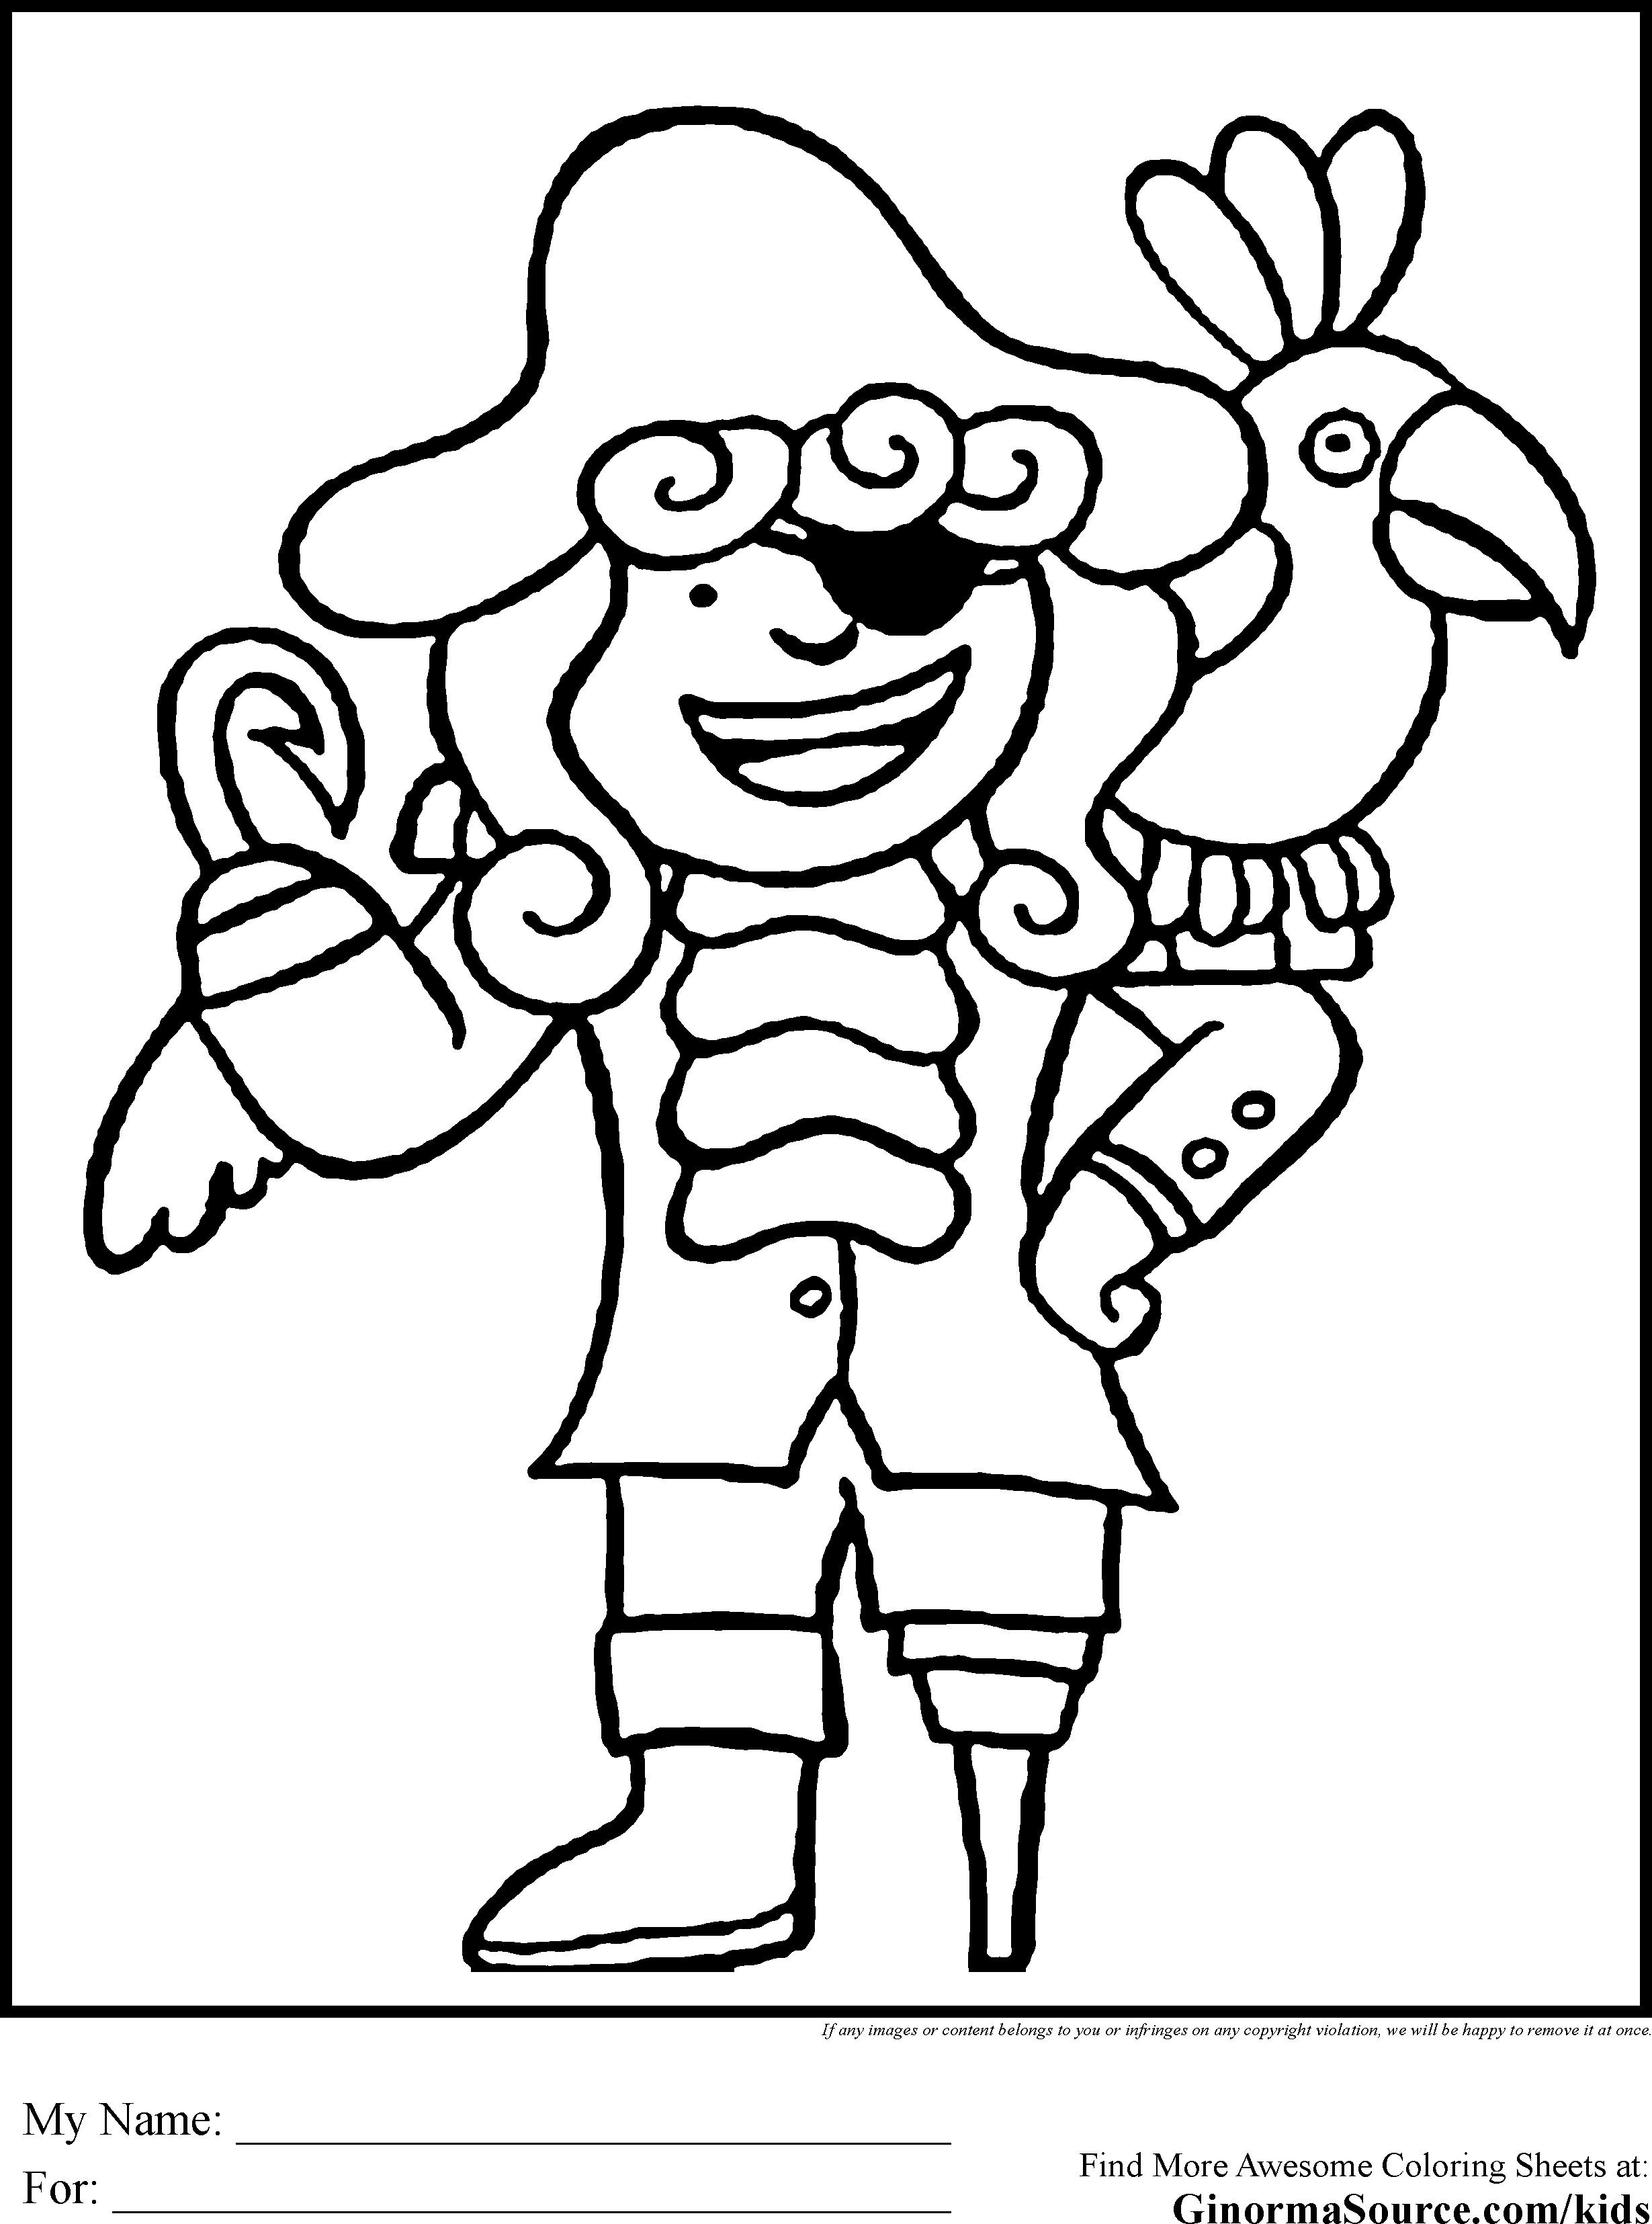 Pirate coloring pages to download and print for free